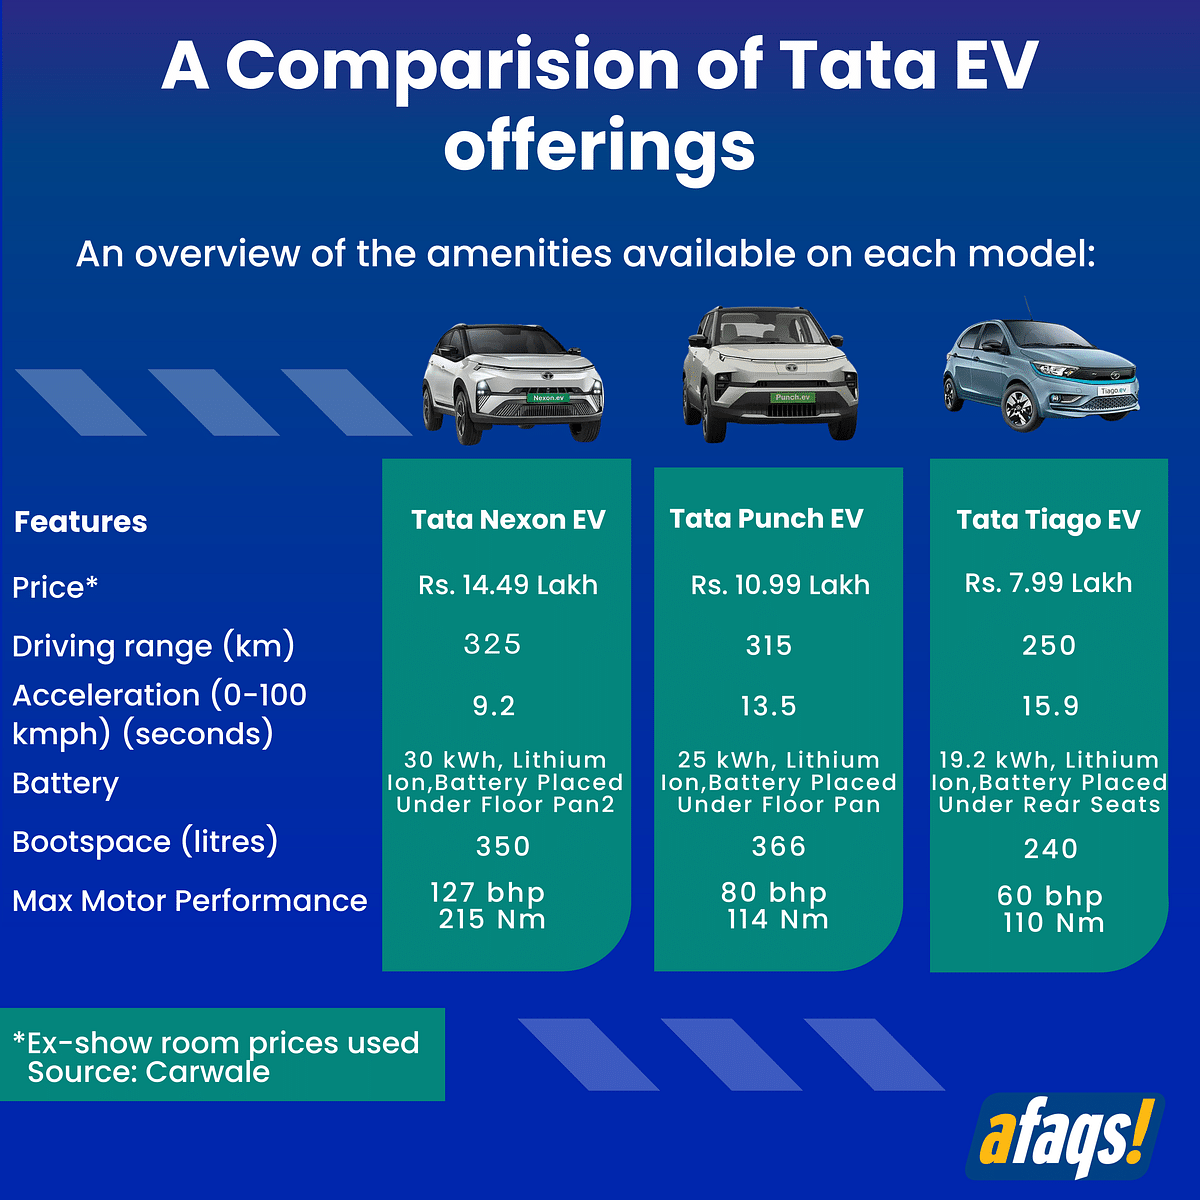 A Comparision of Tata EV offerings